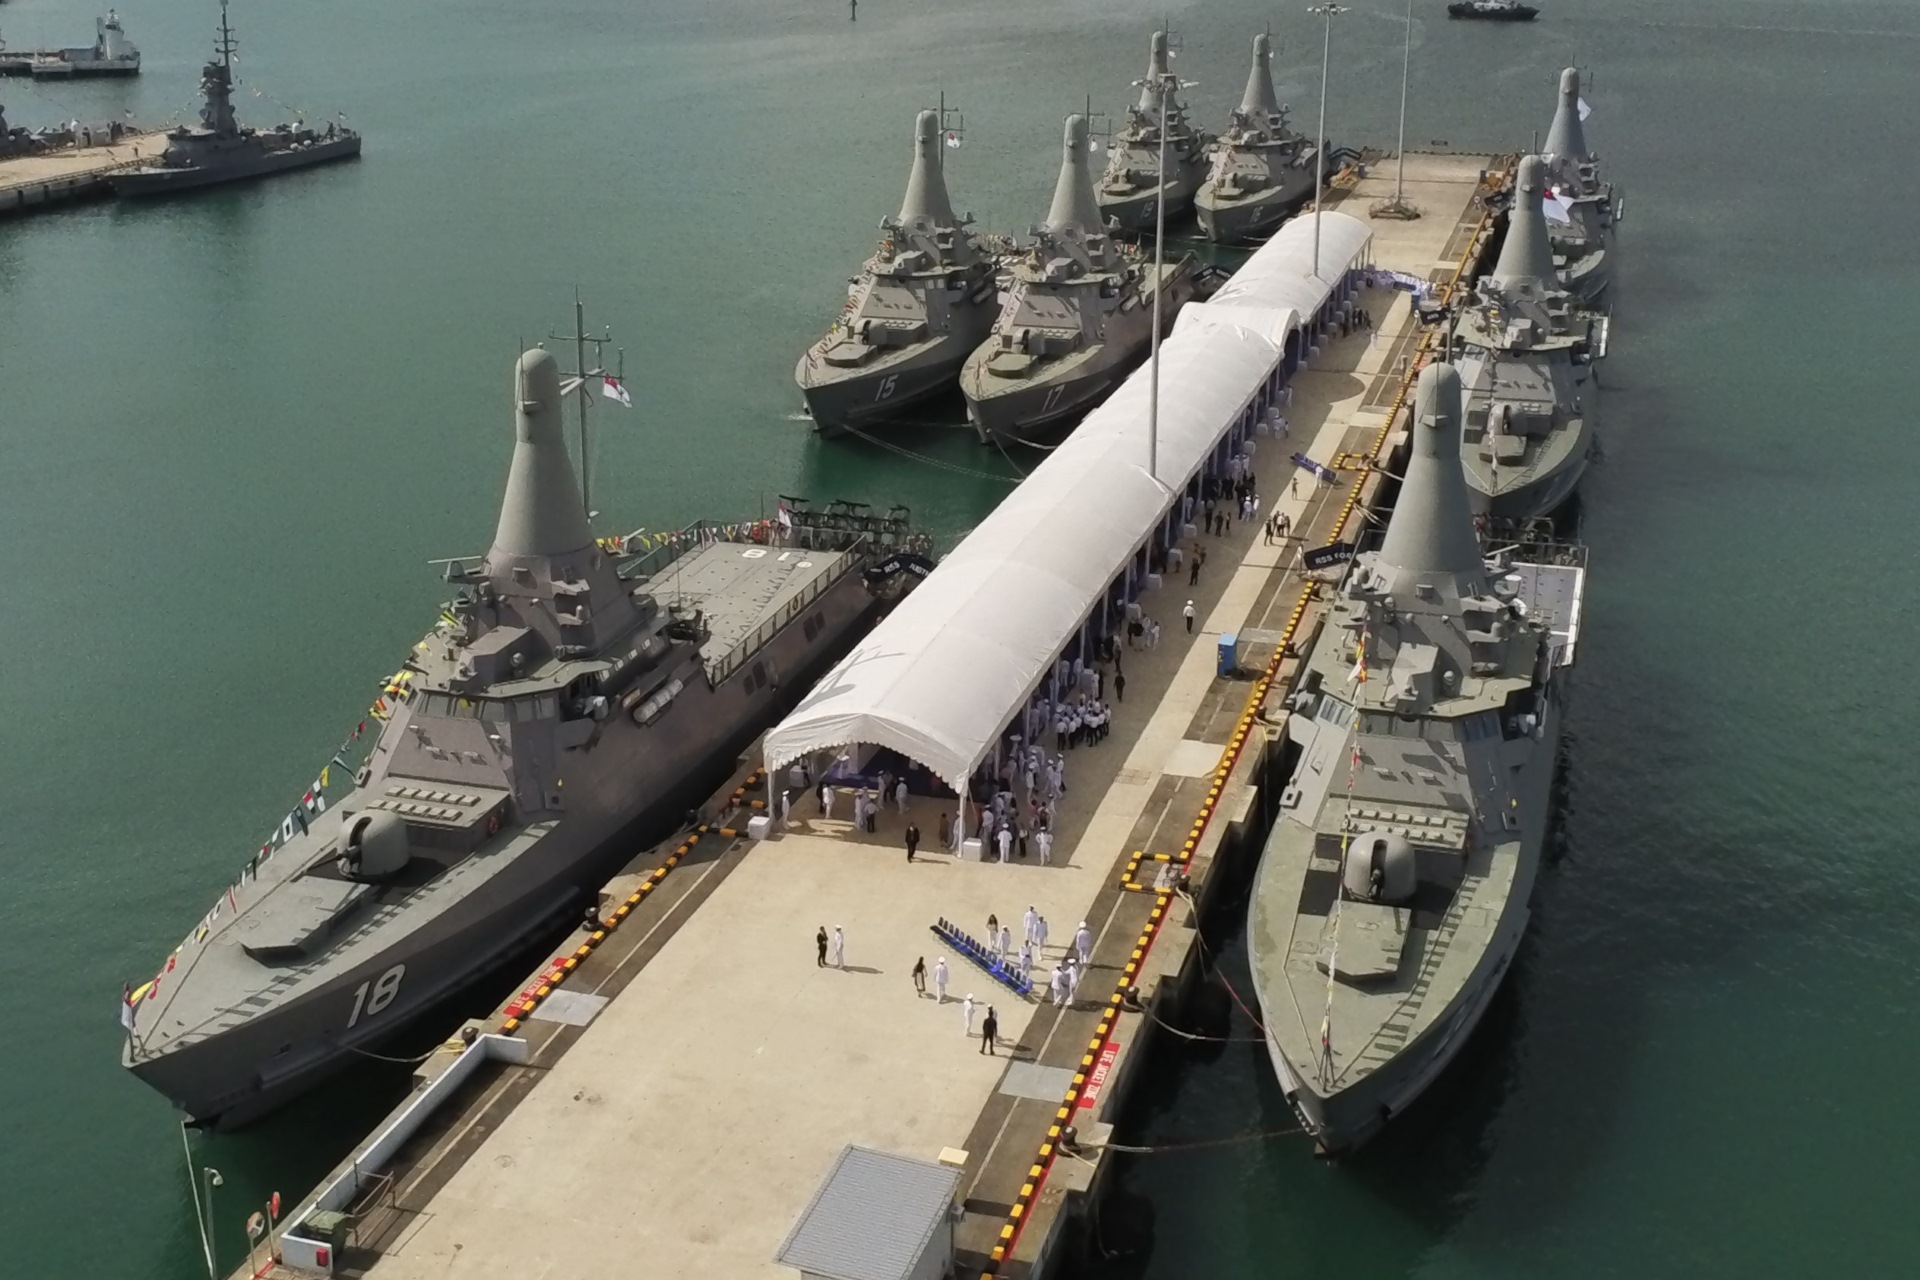 Republic of Singapore Navy Independence-class littoral mission vessels at Tuas Naval Base.